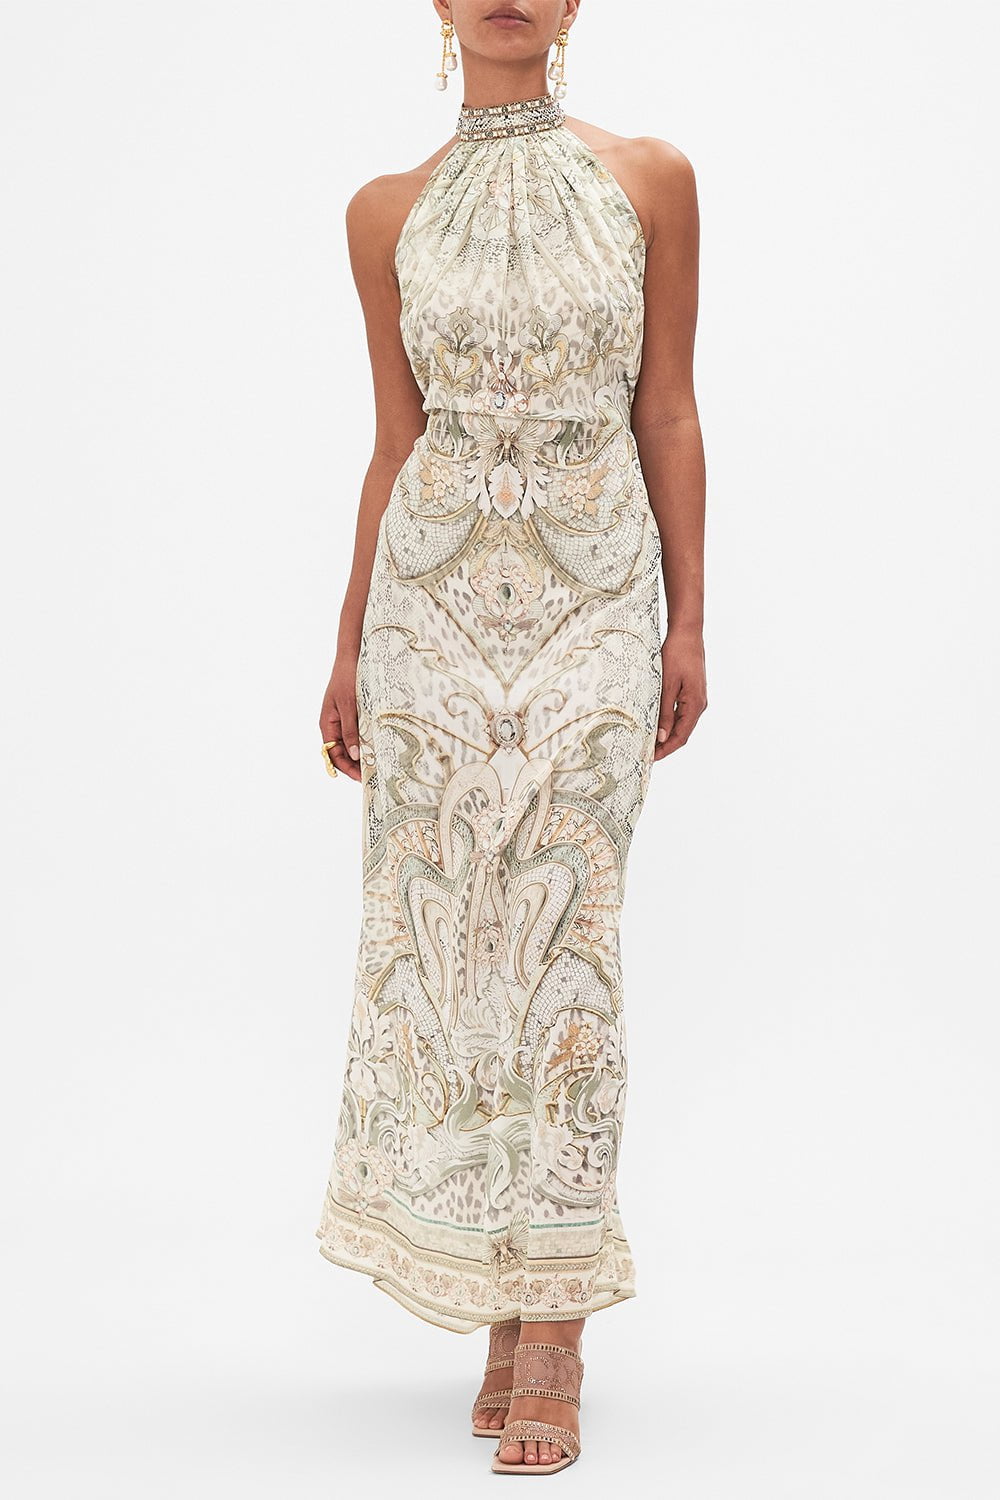 CAMILLA-Tie Neck Long Dress-IVORY TOWER TALES